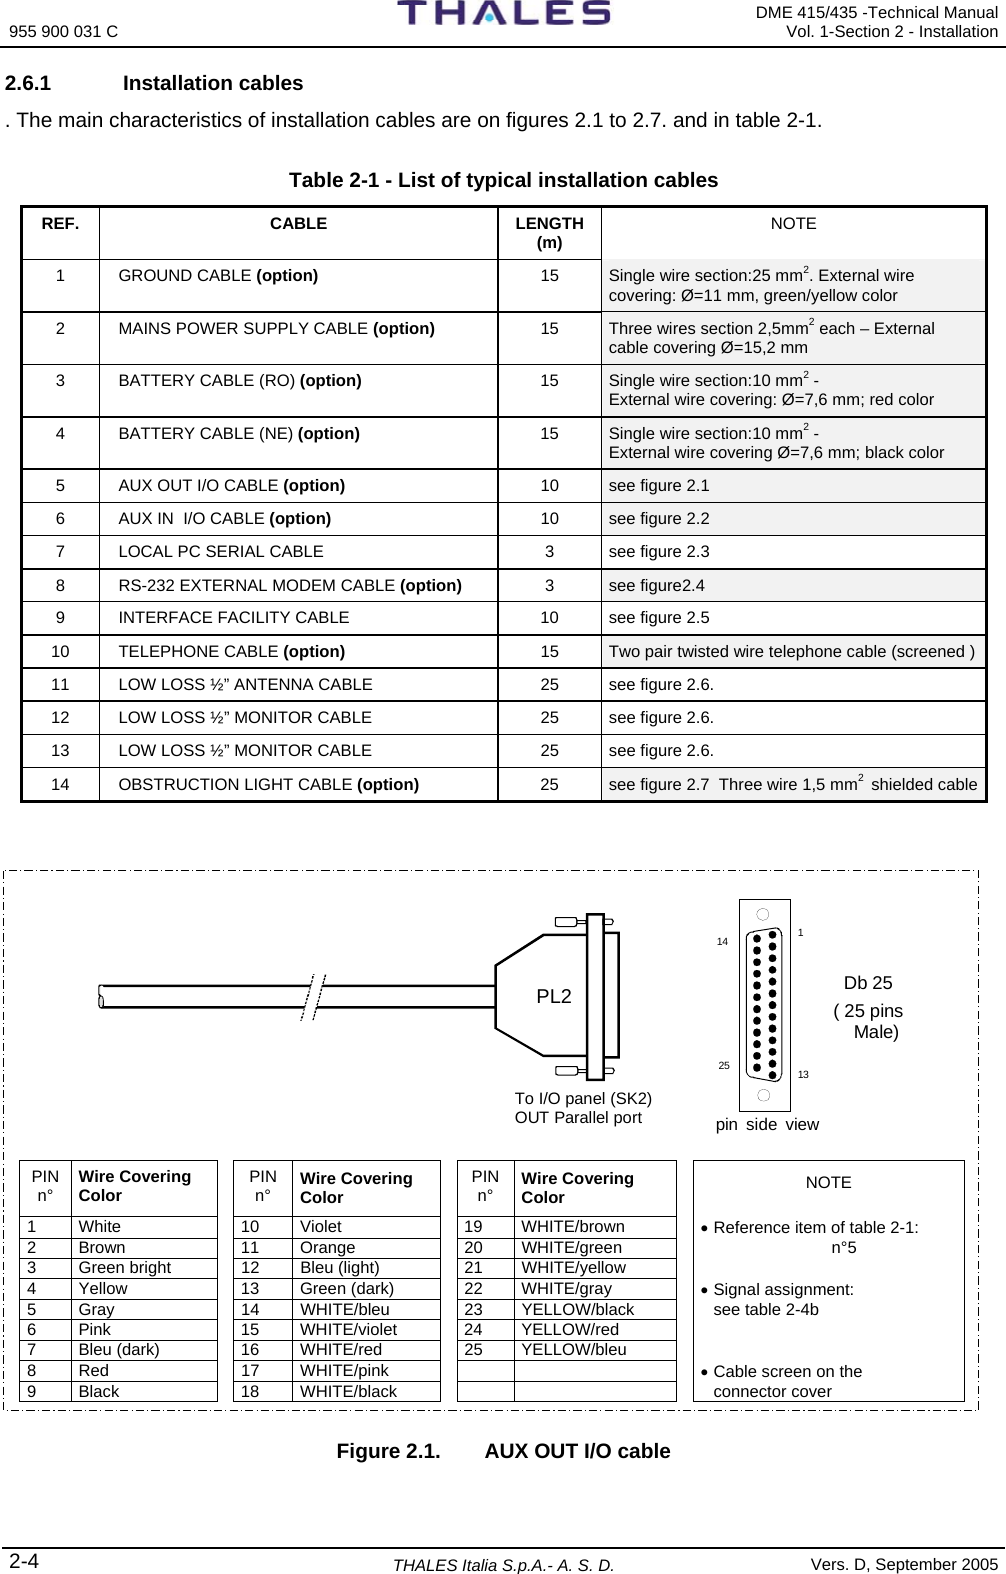 955 900 031 C   DME 415/435 -Technical Manual Vol. 1-Section 2 - Installation 2-4 THALES Italia S.p.A.- A. S. D. Vers. D, September 2005 2.6.1 Installation cables . The main characteristics of installation cables are on figures 2.1 to 2.7. and in table 2-1.  Table 2-1 - List of typical installation cables REF. CABLE LENGTH (m)  NOTE 1 GROUND CABLE (option) 15 Single wire section:25 mm2. External wire covering: Ø=11 mm, green/yellow color  2  MAINS POWER SUPPLY CABLE (option) 15 Three wires section 2,5mm2 each – External cable covering Ø=15,2 mm  3  BATTERY CABLE (RO) (option) 15 Single wire section:10 mm2 -   External wire covering: Ø=7,6 mm; red color 4  BATTERY CABLE (NE) (option) 15 Single wire section:10 mm2 -   External wire covering Ø=7,6 mm; black color 5  AUX OUT I/O CABLE (option) 10 see figure 2.1  6  AUX IN  I/O CABLE (option) 10 see figure 2.2 7  LOCAL PC SERIAL CABLE  3  see figure 2.3 8  RS-232 EXTERNAL MODEM CABLE (option) 3 see figure2.4 9  INTERFACE FACILITY CABLE  10  see figure 2.5 10 TELEPHONE CABLE (option) 15 Two pair twisted wire telephone cable (screened )11  LOW LOSS ½” ANTENNA CABLE  25  see figure 2.6. 12  LOW LOSS ½” MONITOR CABLE  25  see figure 2.6. 13  LOW LOSS ½” MONITOR CABLE   25  see figure 2.6. 14 OBSTRUCTION LIGHT CABLE (option) 25 see figure 2.7  Three wire 1,5 mm2  shielded cable    Db 25 ( 25 pins     Male)To I/O panel (SK2)OUT Parallel portPL21131425pin side view   PIN n°  Wire Covering Color  PIN n°  Wire Covering Color  PIN n°  Wire Covering Color  NOTE 1 White   10 Violet  19 WHITE/brown  • Reference item of table 2-1:  2 Brown   11 Orange  20 WHITE/green  n°5 3  Green bright    12  Bleu (light)  21  WHITE/yellow   4 Yellow   13 Green (dark)  22 WHITE/gray  • Signal assignment: 5  Gray    14  WHITE/bleu  23  YELLOW/black  see table 2-4b   6 Pink   15 WHITE/violet  24 YELLOW/red   7 Bleu (dark)   16 WHITE/red  25 YELLOW/bleu   8 Red   17 WHITE/pink      • Cable screen on the  9 Black   18 WHITE/black      connector cover  Figure 2.1.   AUX OUT I/O cable   